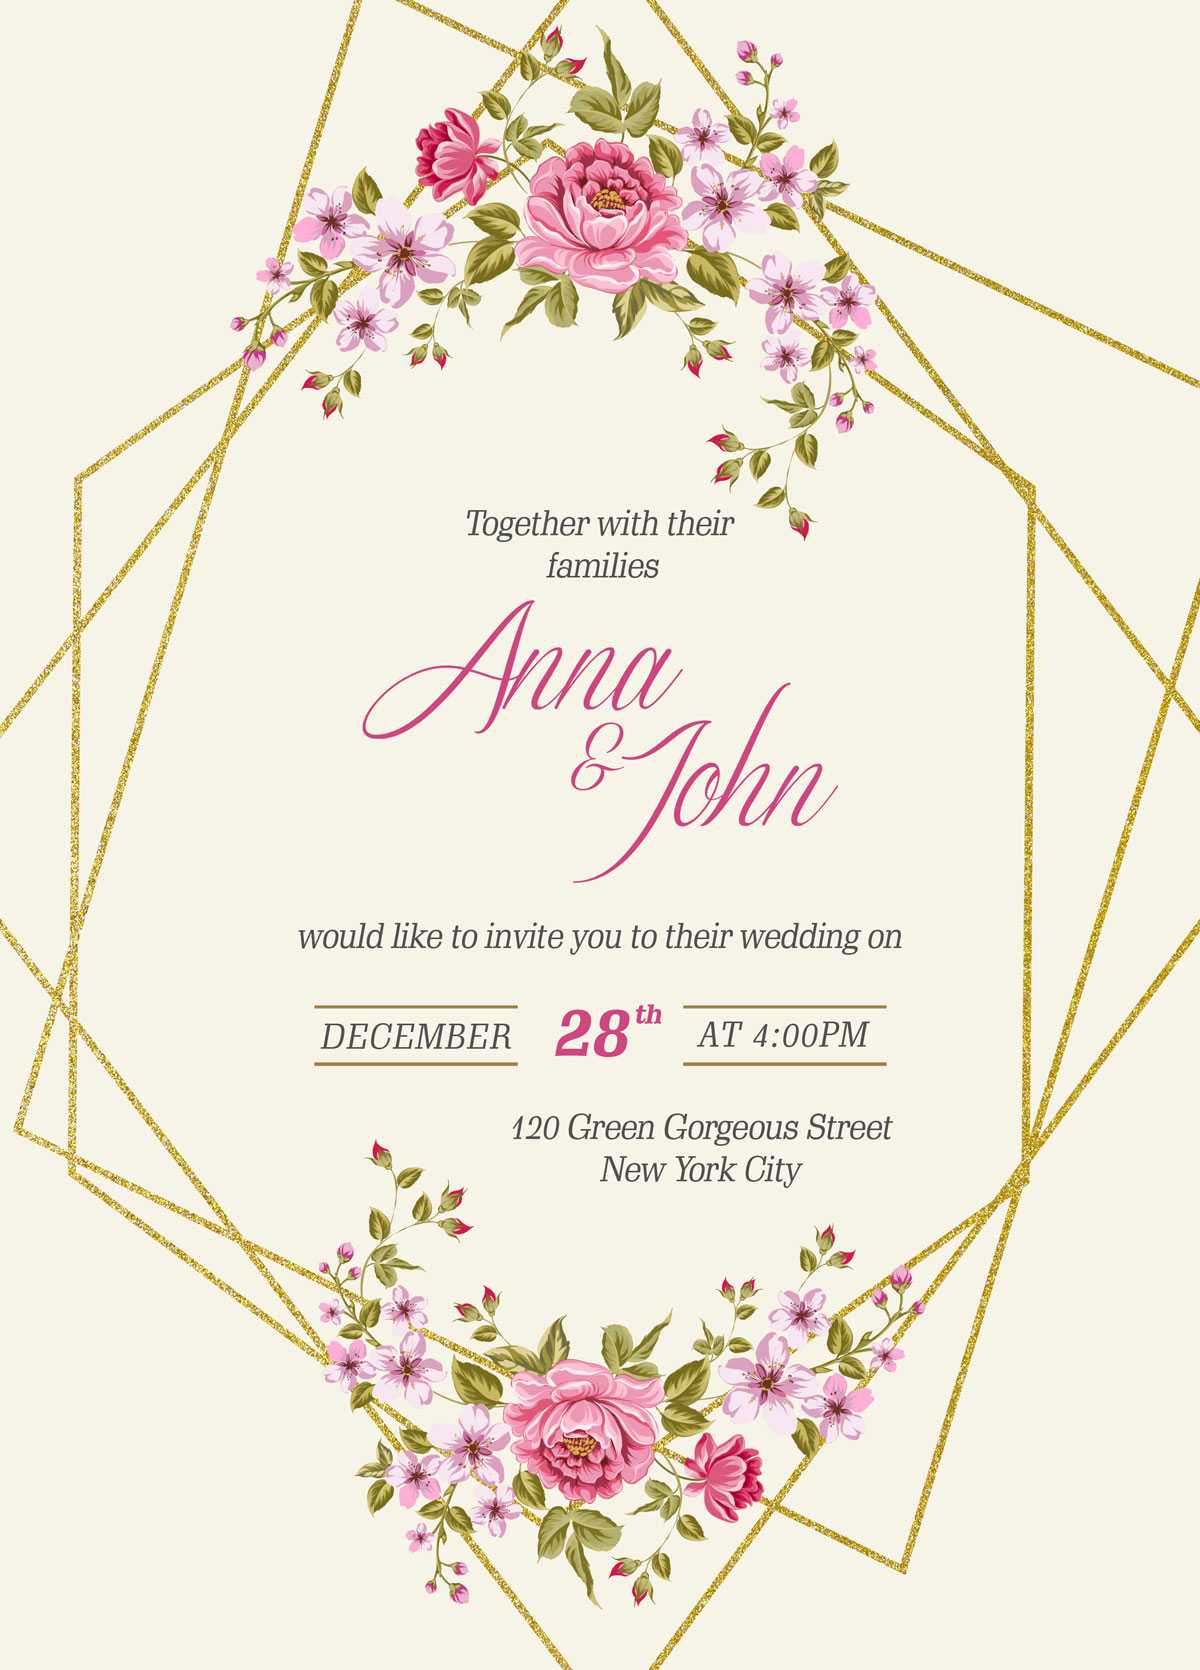 Marriage Invitation Card Template In 2019 Marriage Regarding Invitation Cards Templates For Marriage